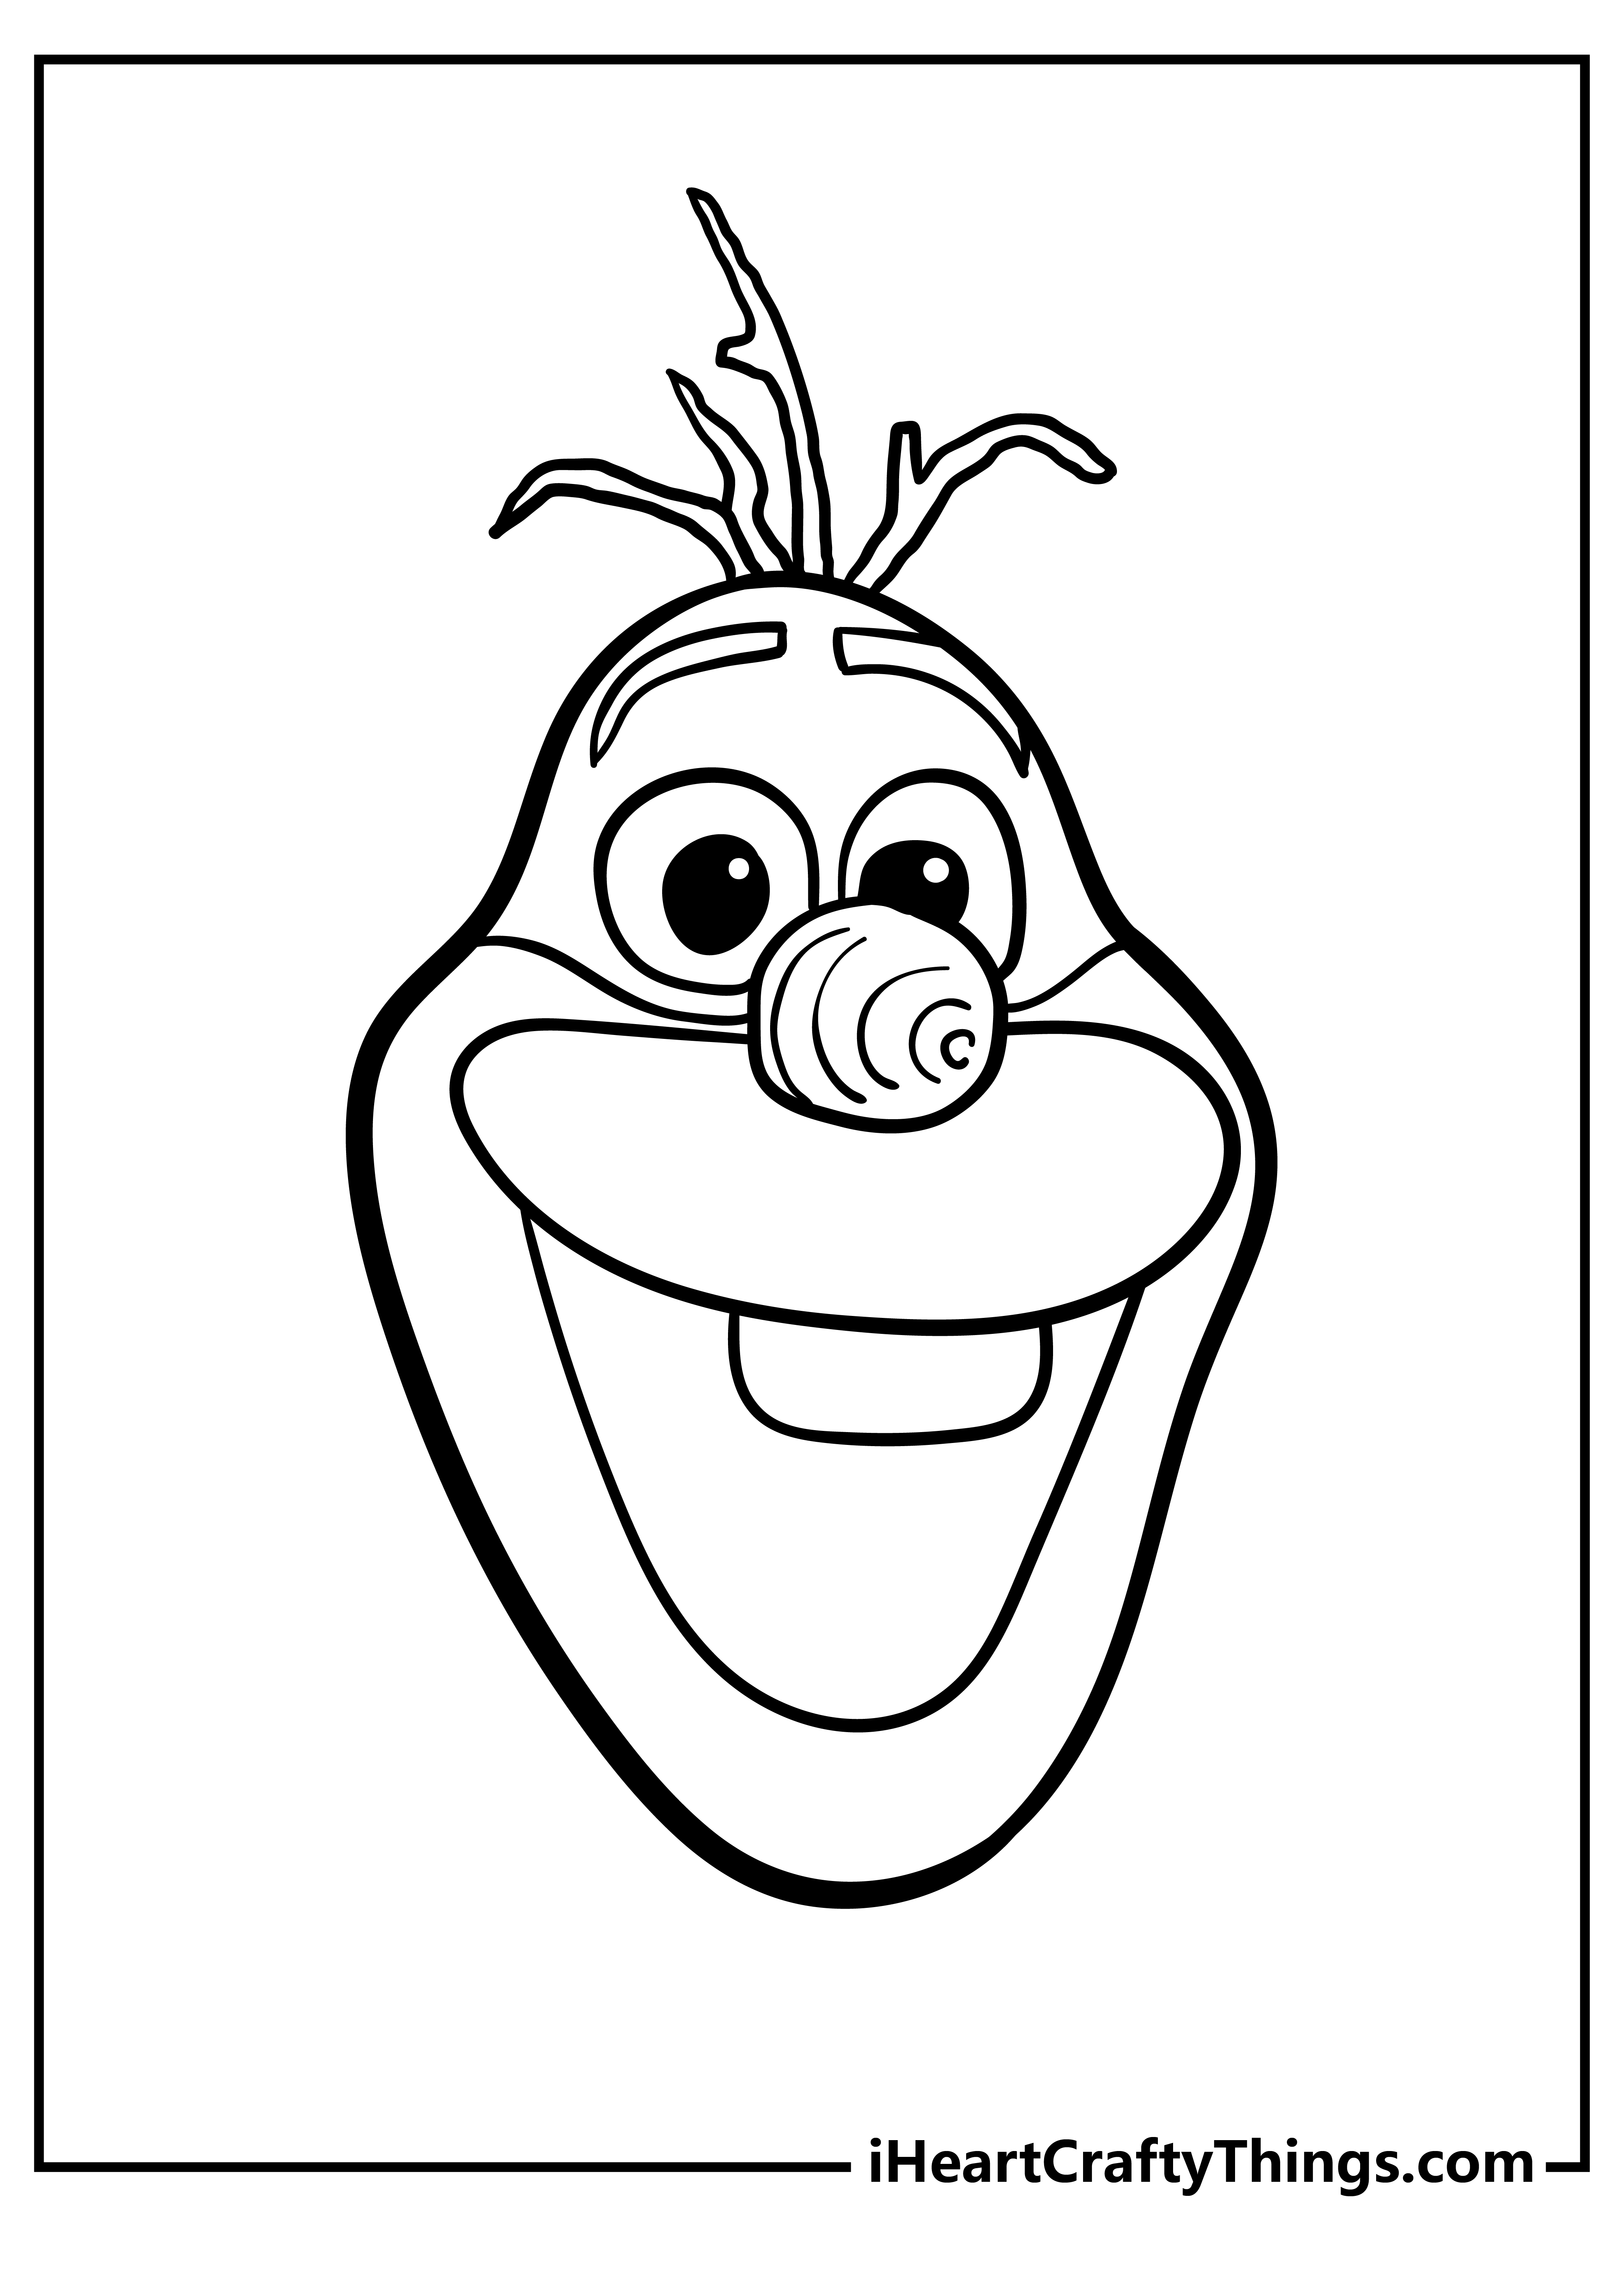 Olaf Coloring Pages for adults free printable